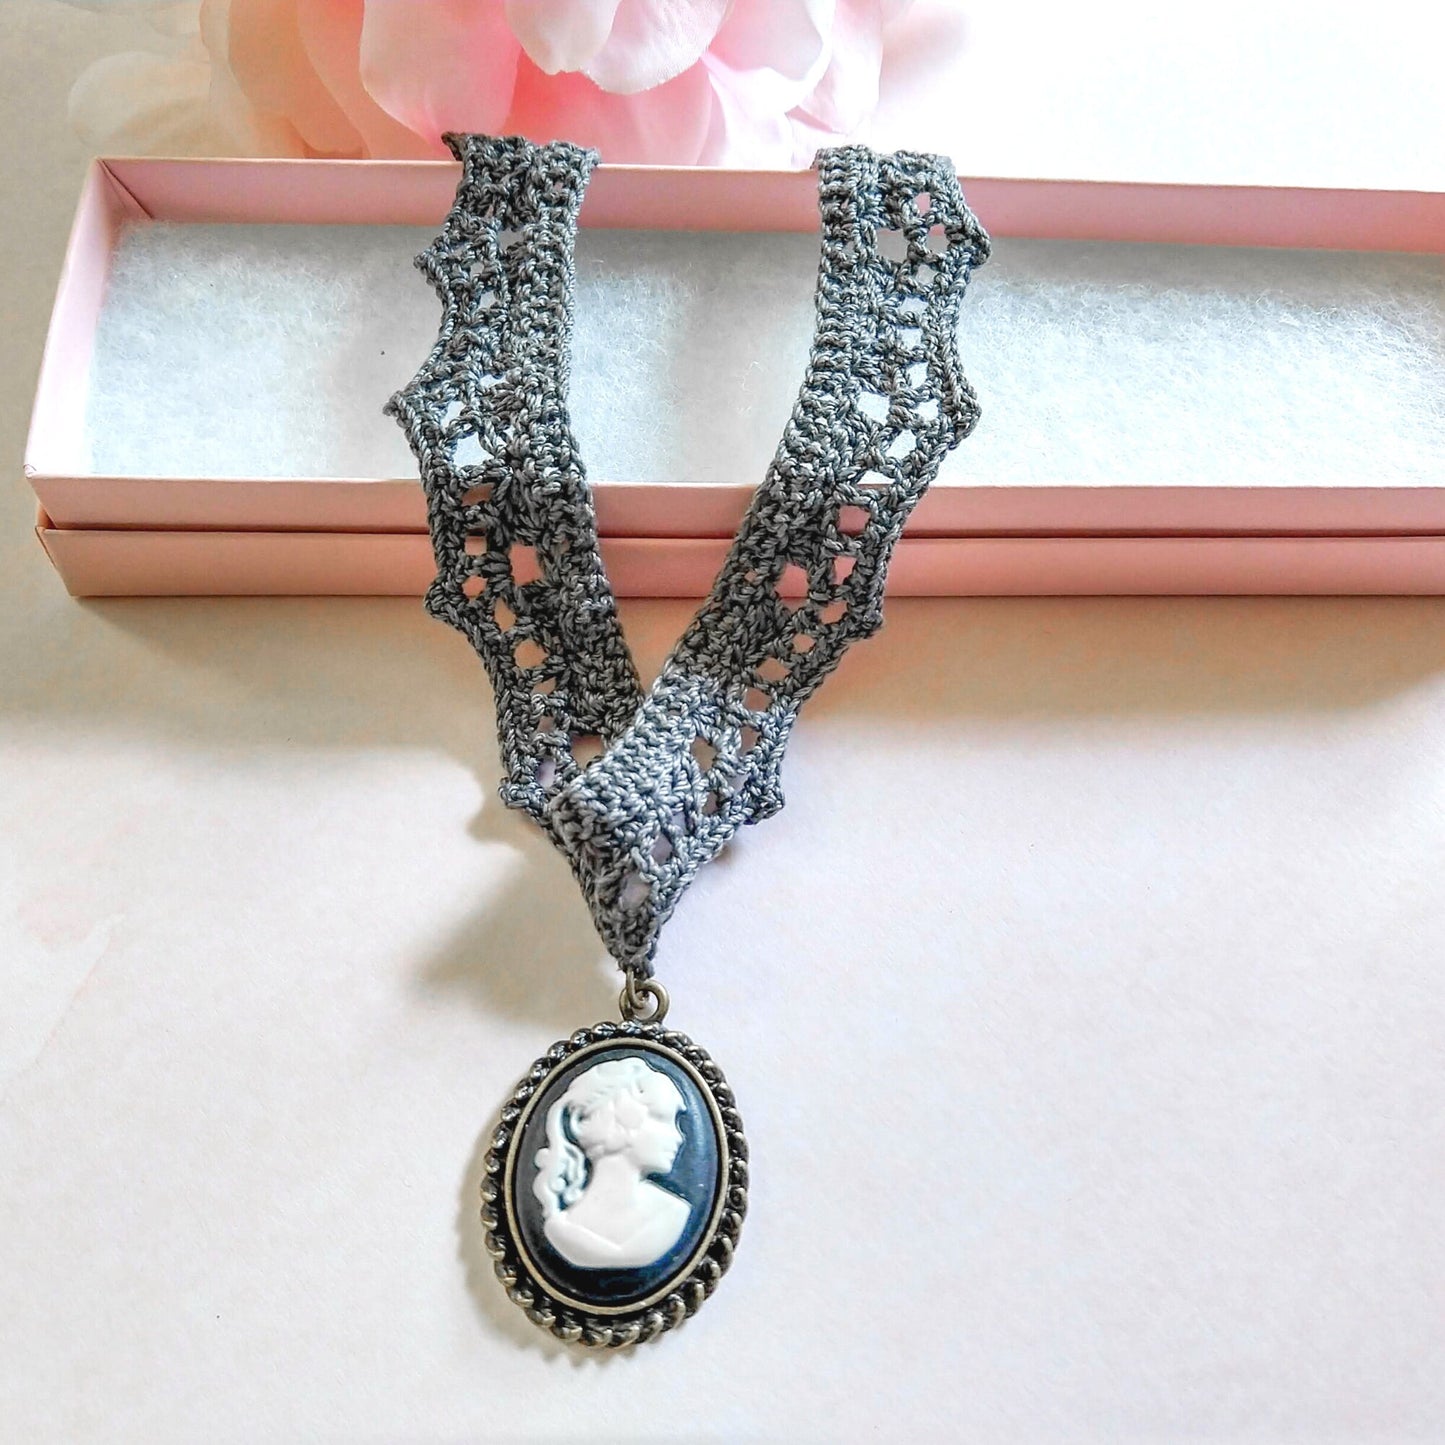 Cameo Lace Choker Necklace